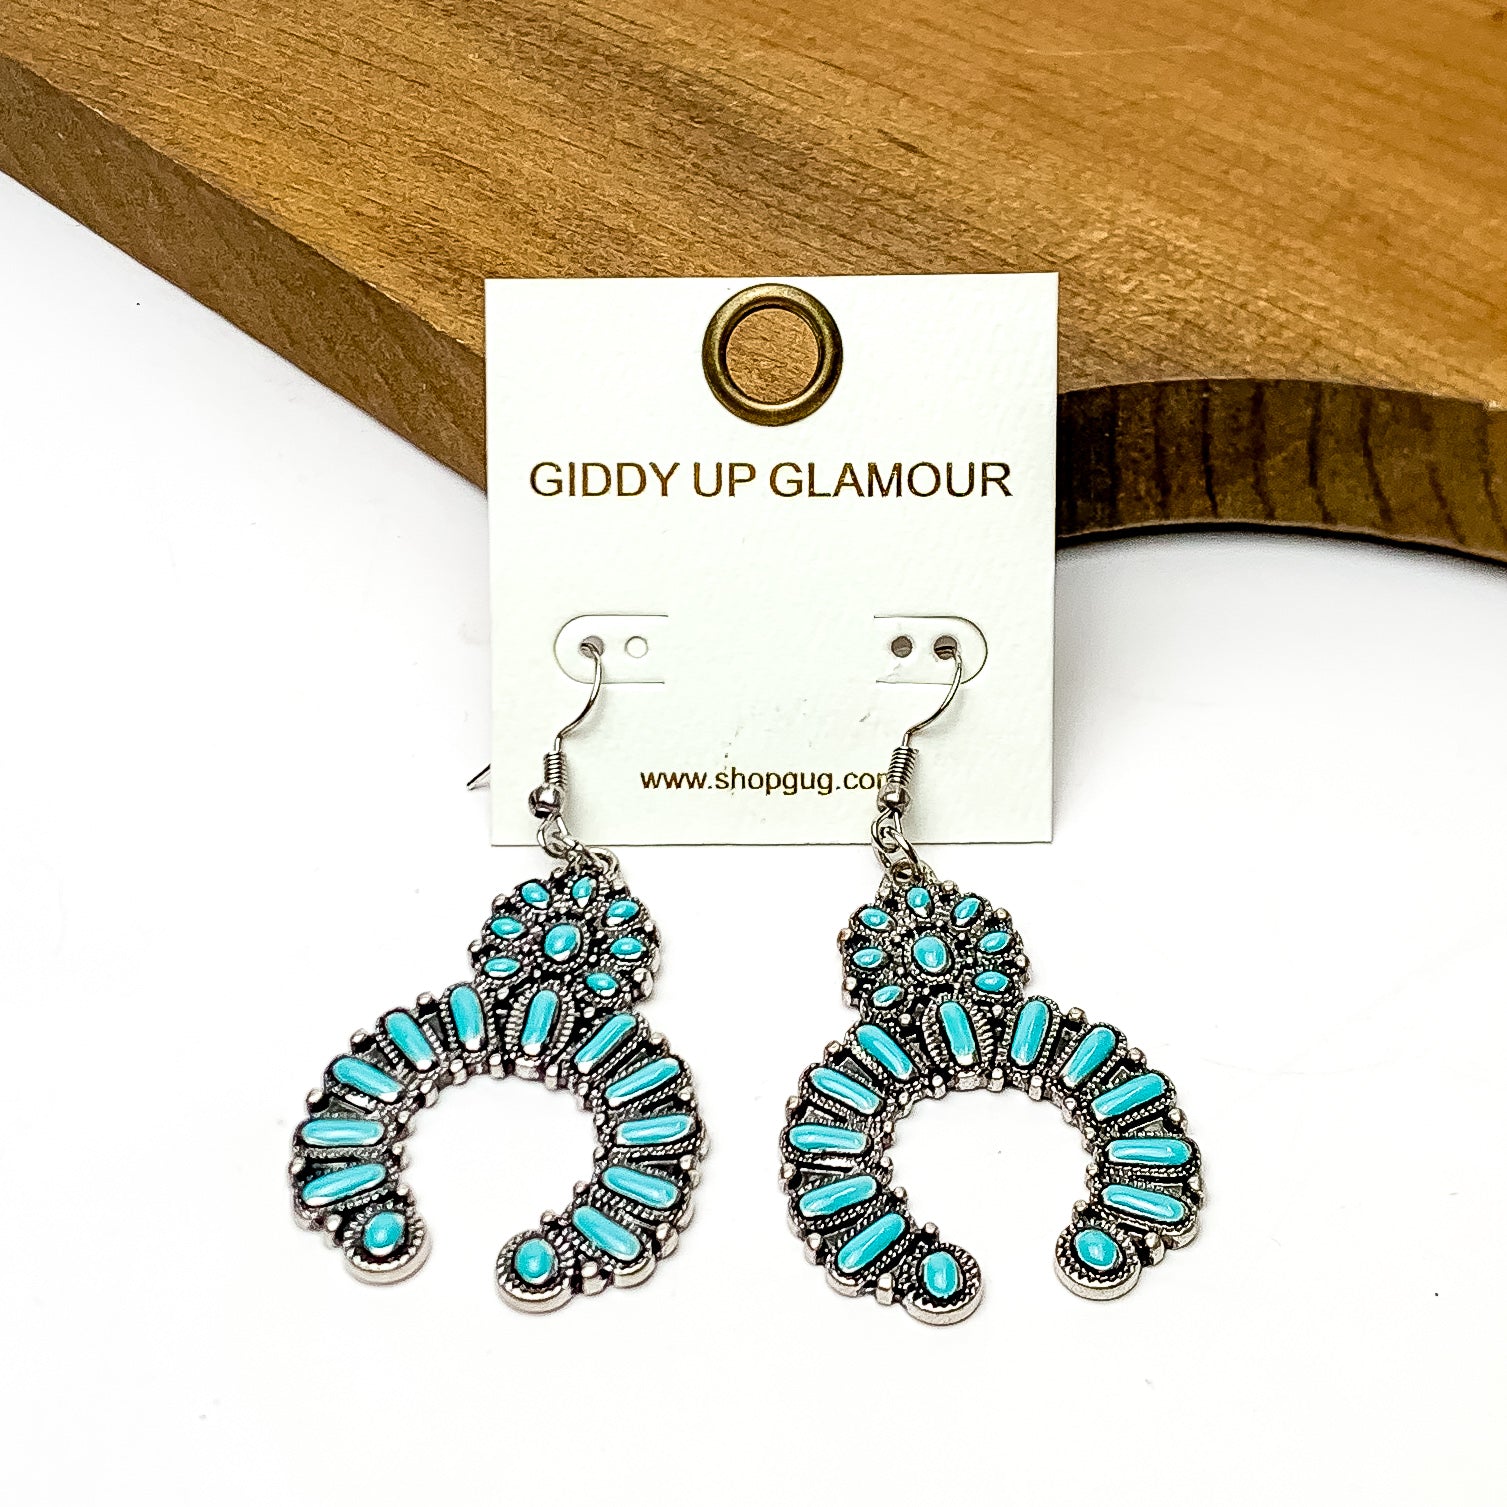 Squash Blossom Silver Tone Medium Earrings in Turquoise. These earrings are pictured on a white background and are laying against a wood piece.